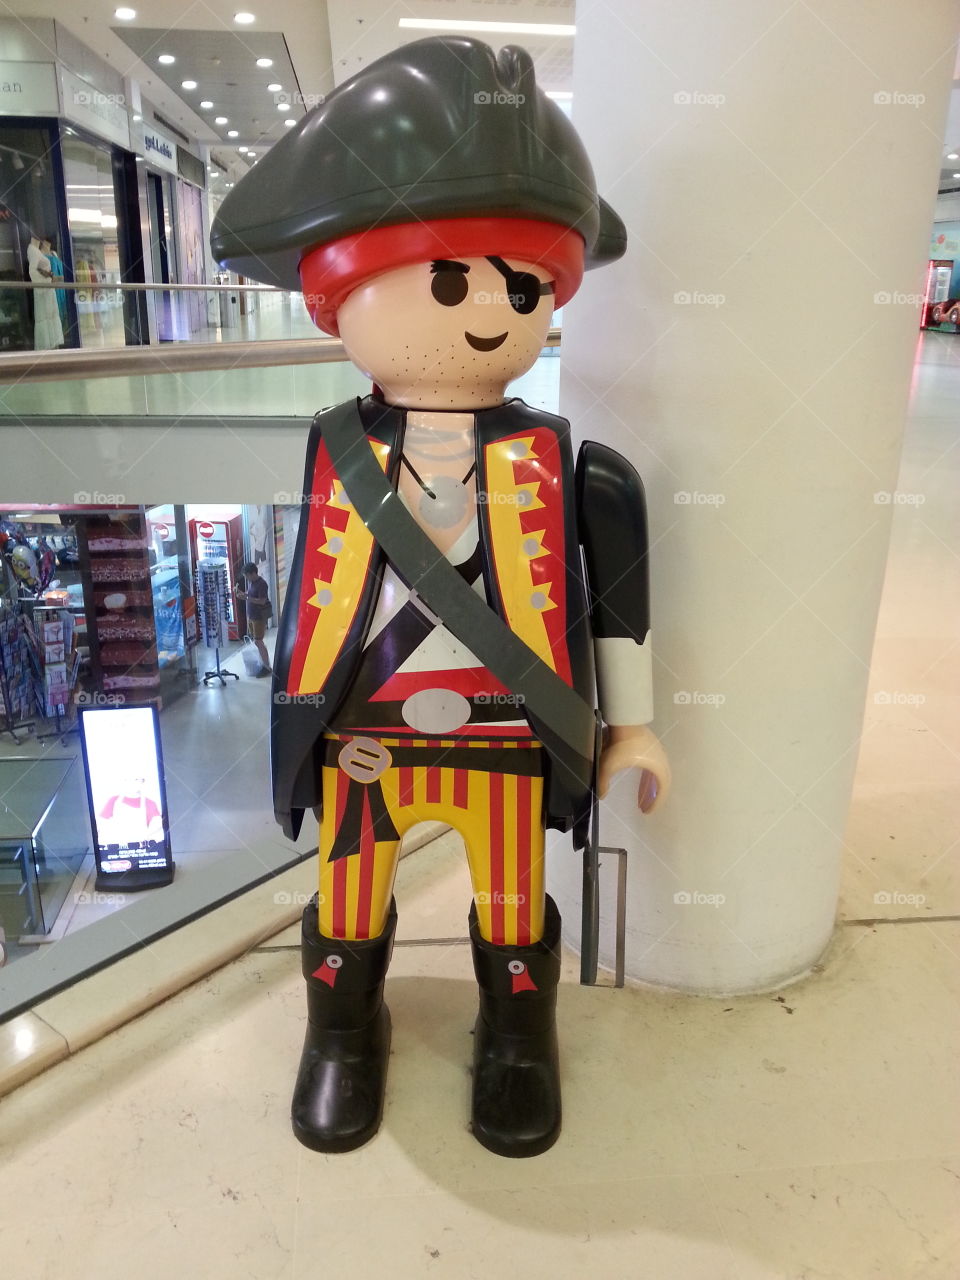 Statue of a lego doll